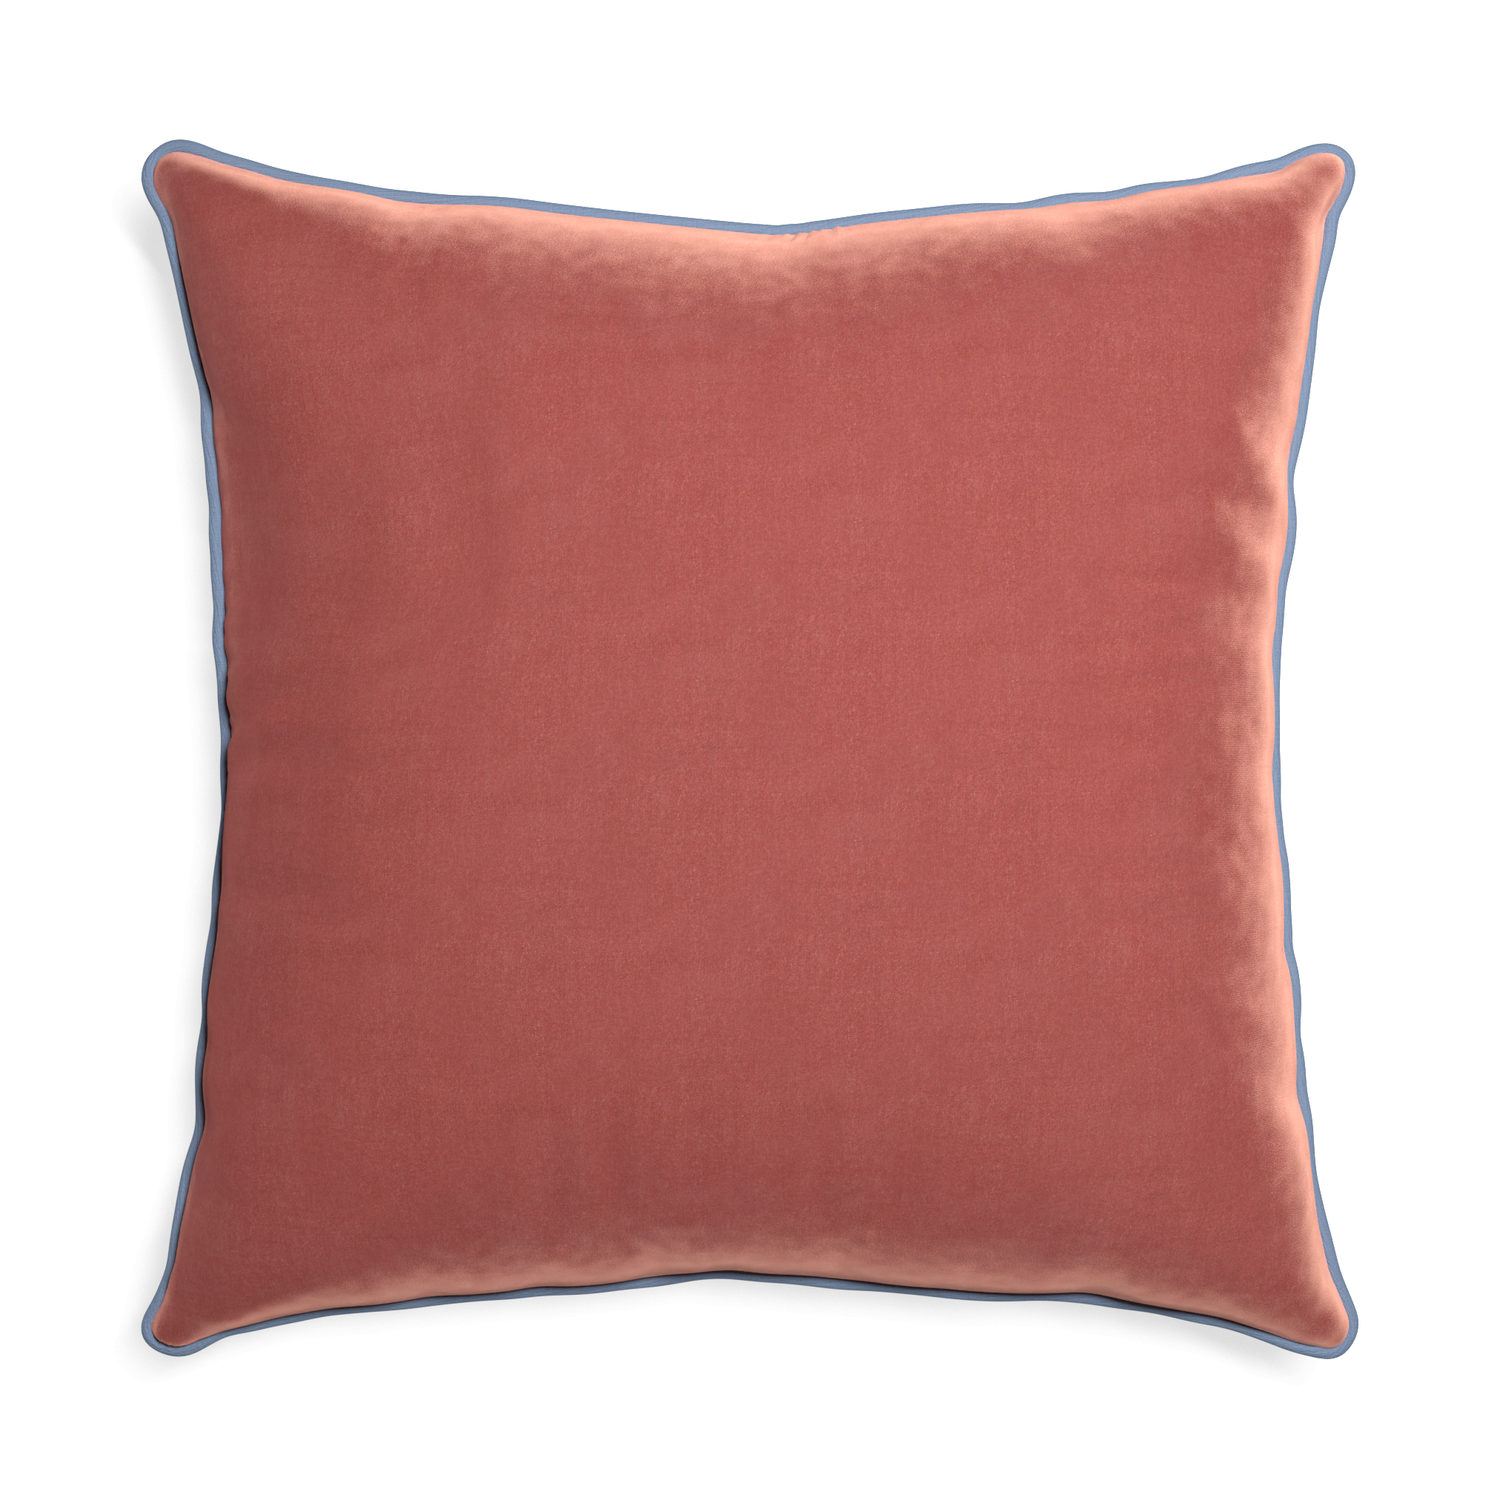 Euro-sham cosmo velvet custom coralpillow with sky piping on white background